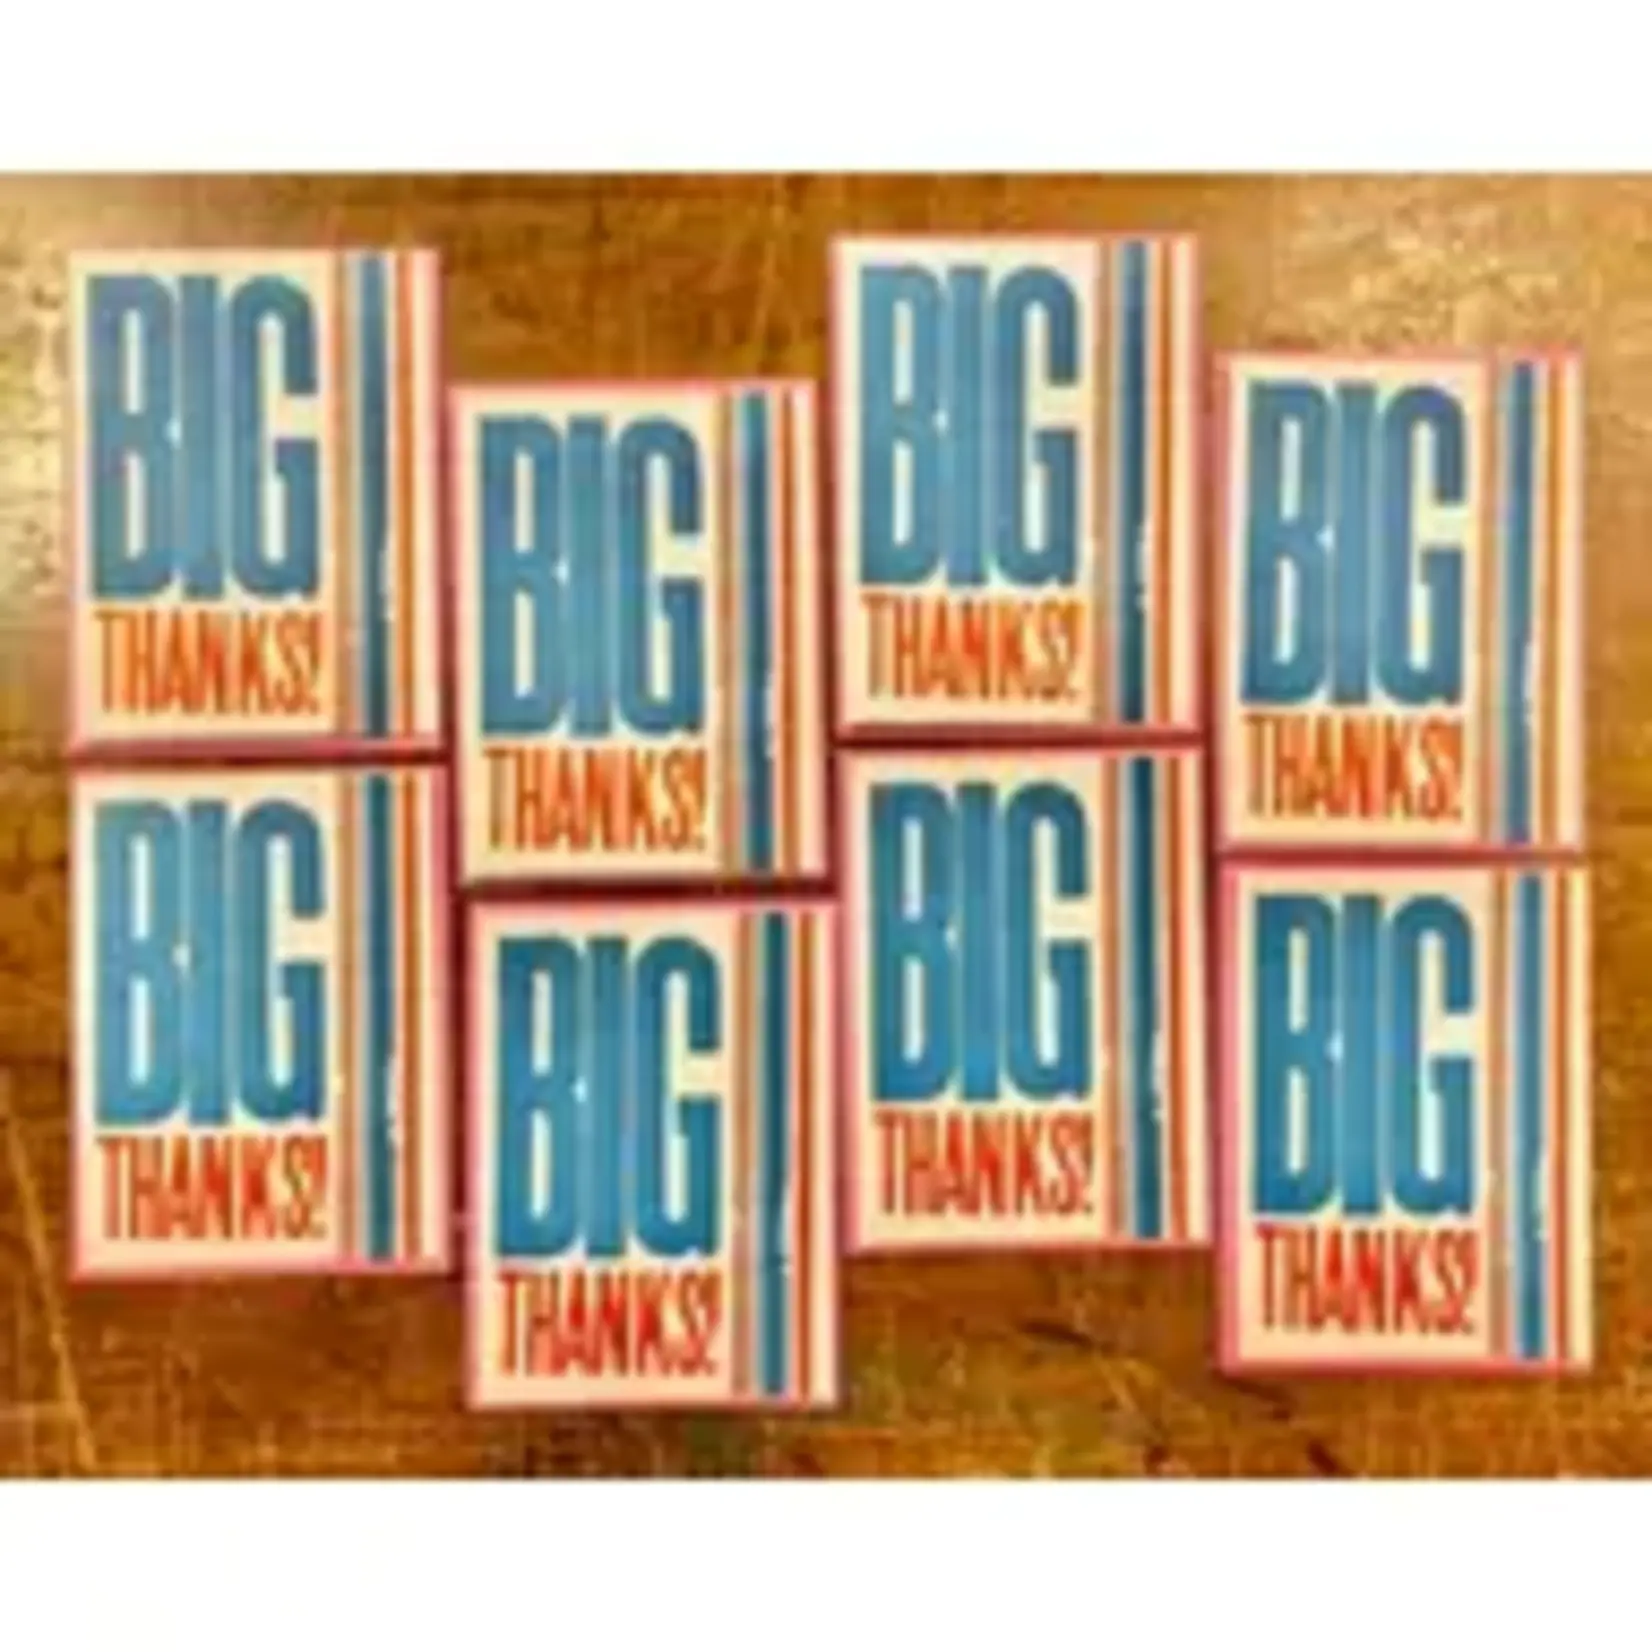 Hatch Show Print Big Thanks Boxed Cards